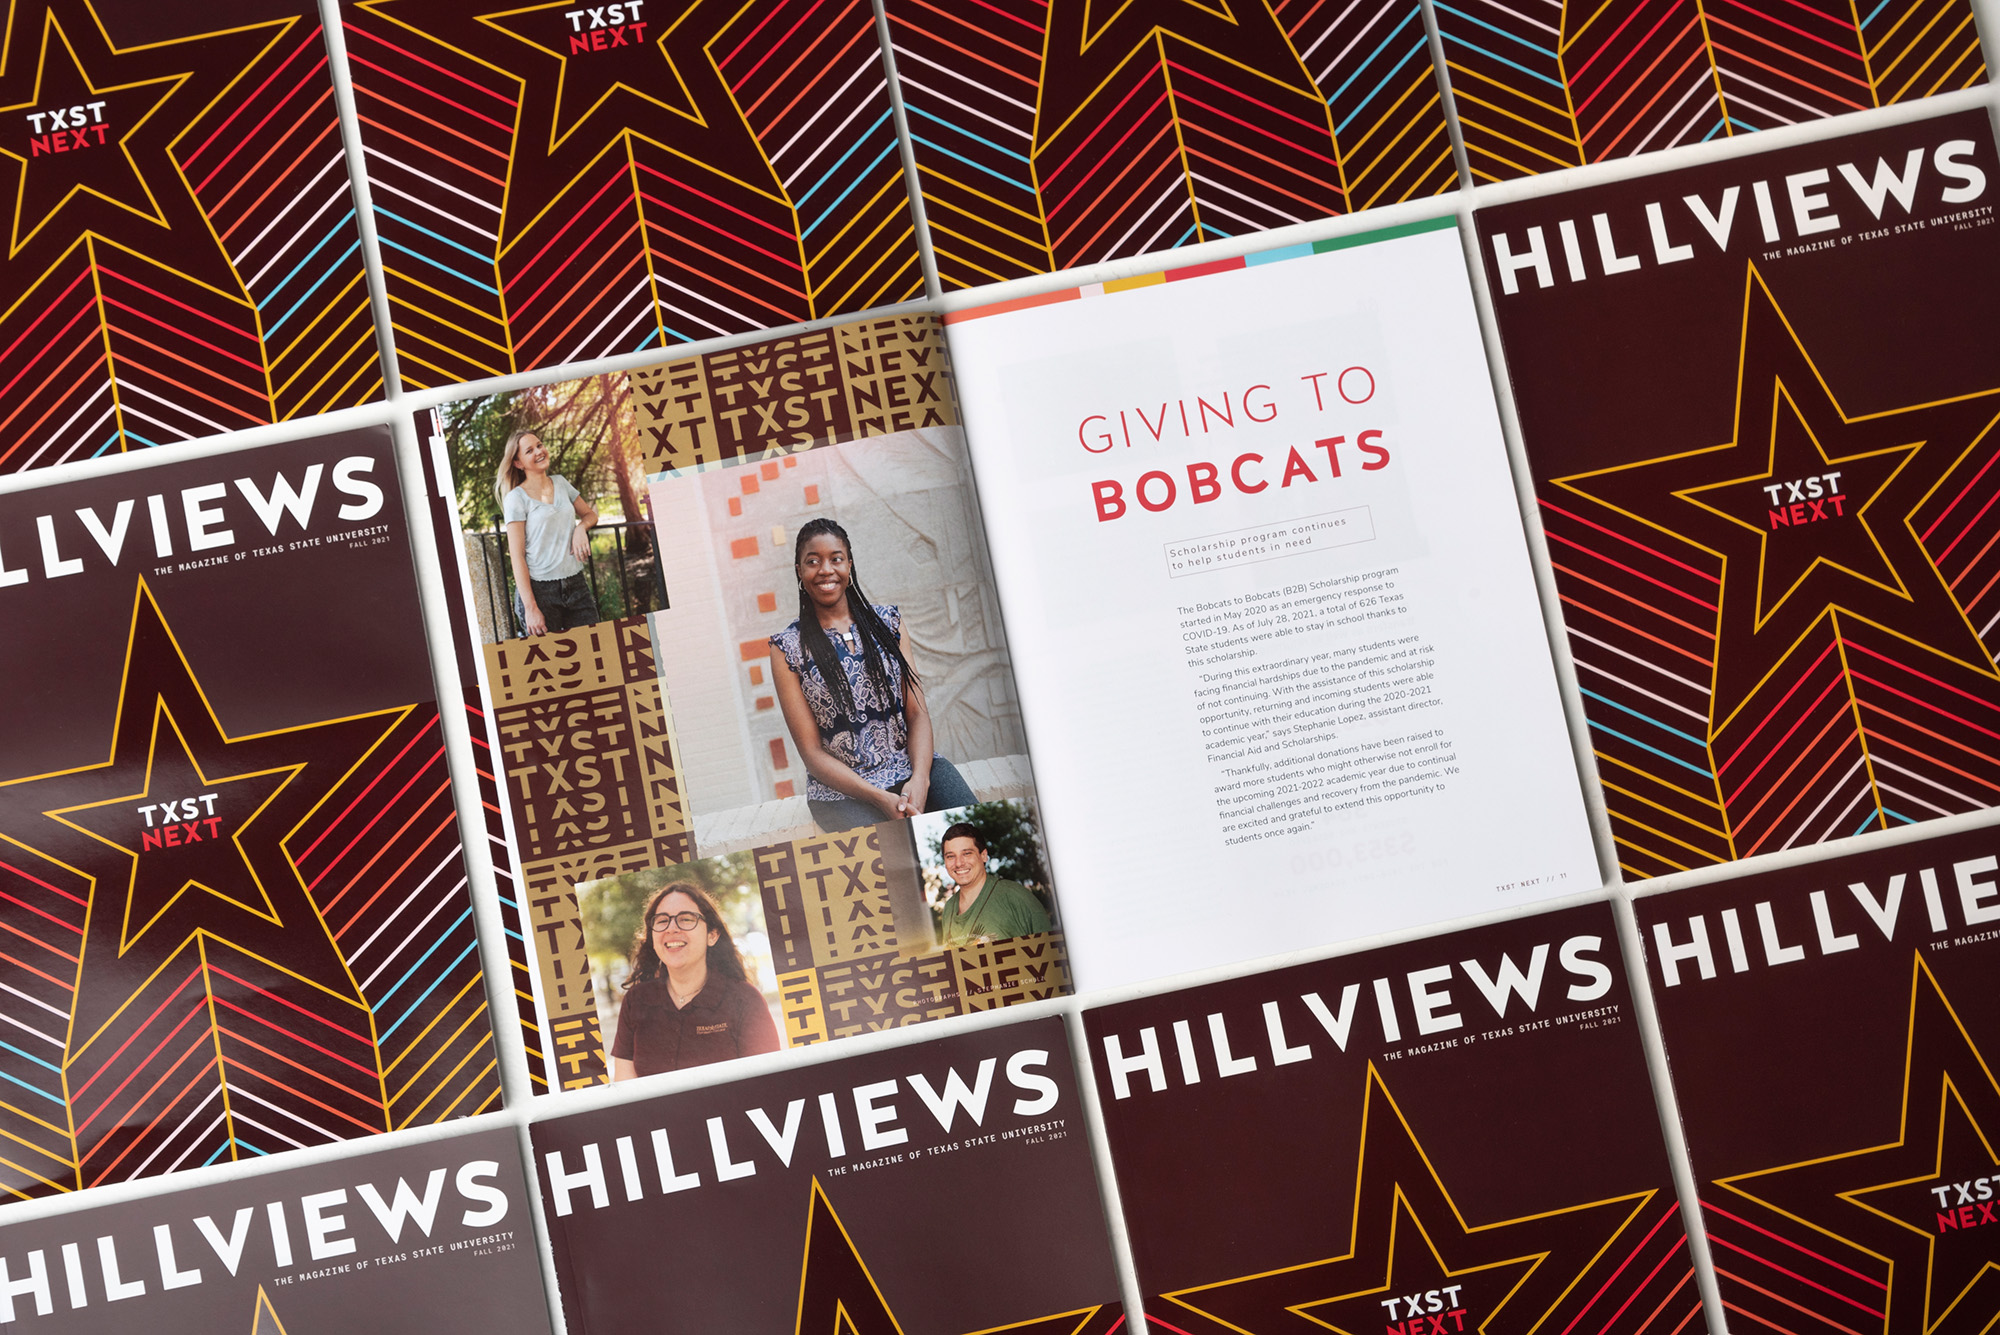 Multiple copies of Hillviews magazine with one page opened to "Giving to Bobcats" story